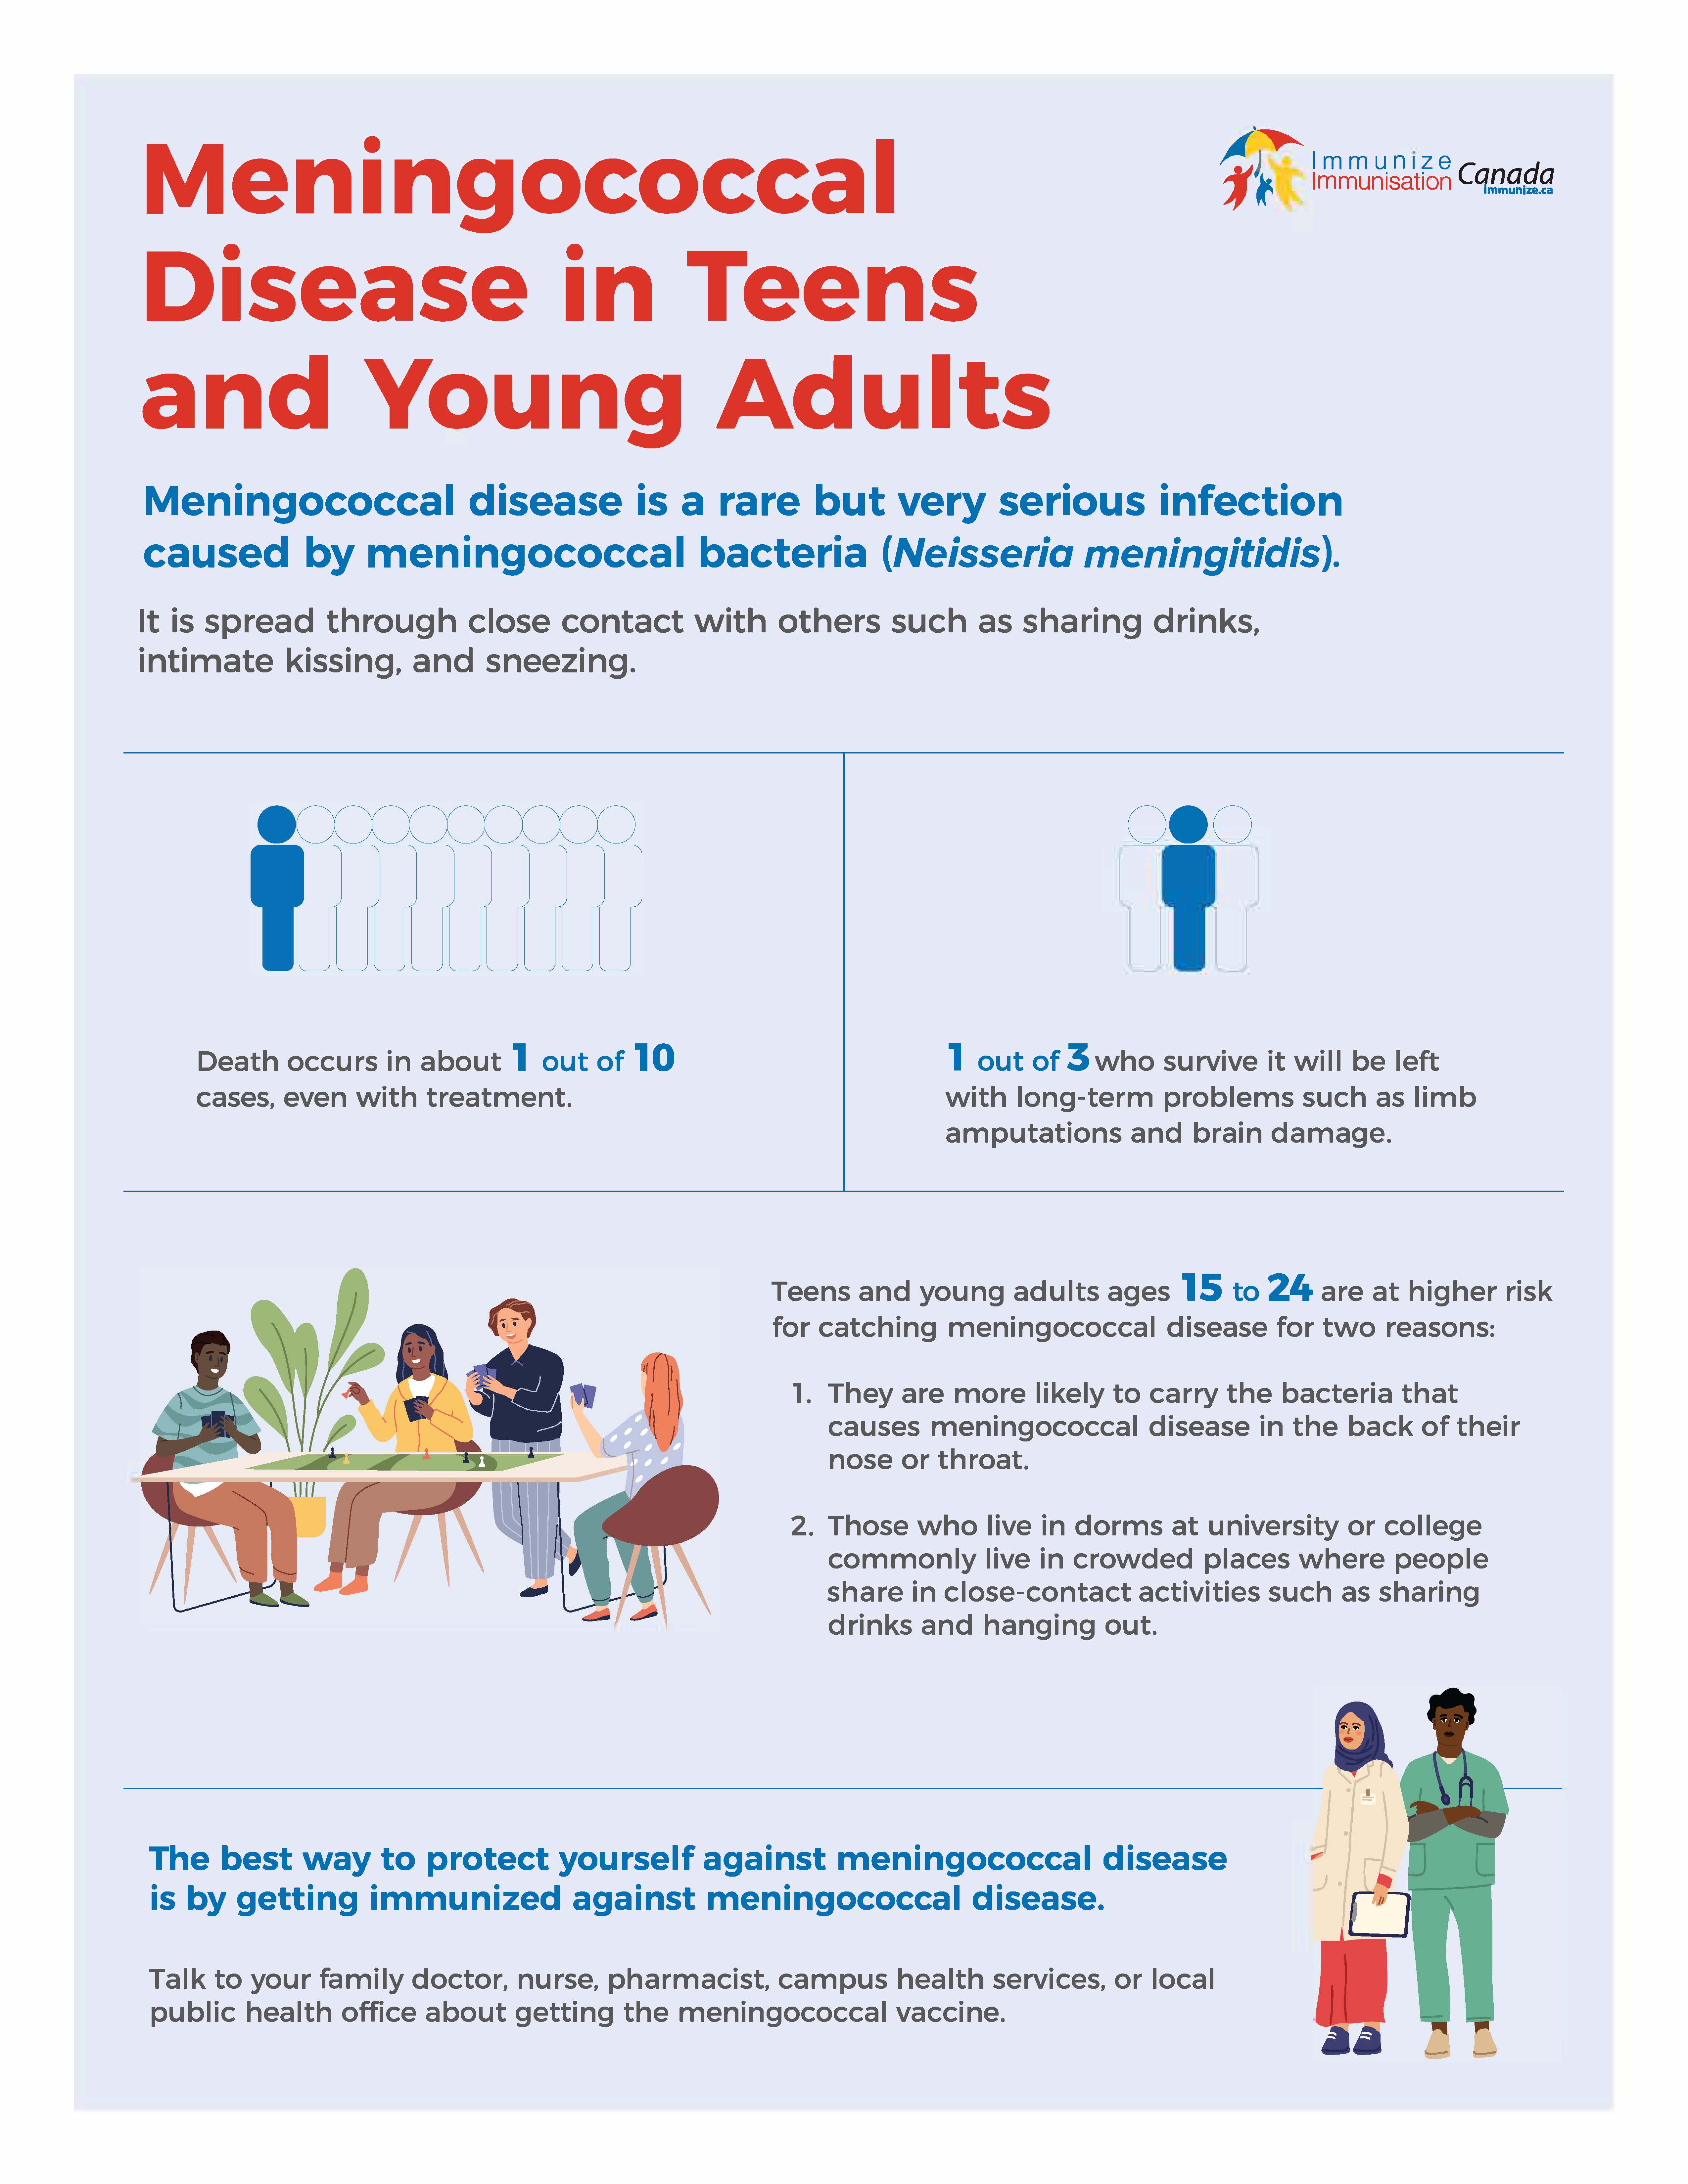 Meningococcal Disease in Teens and Young Adults - infographic